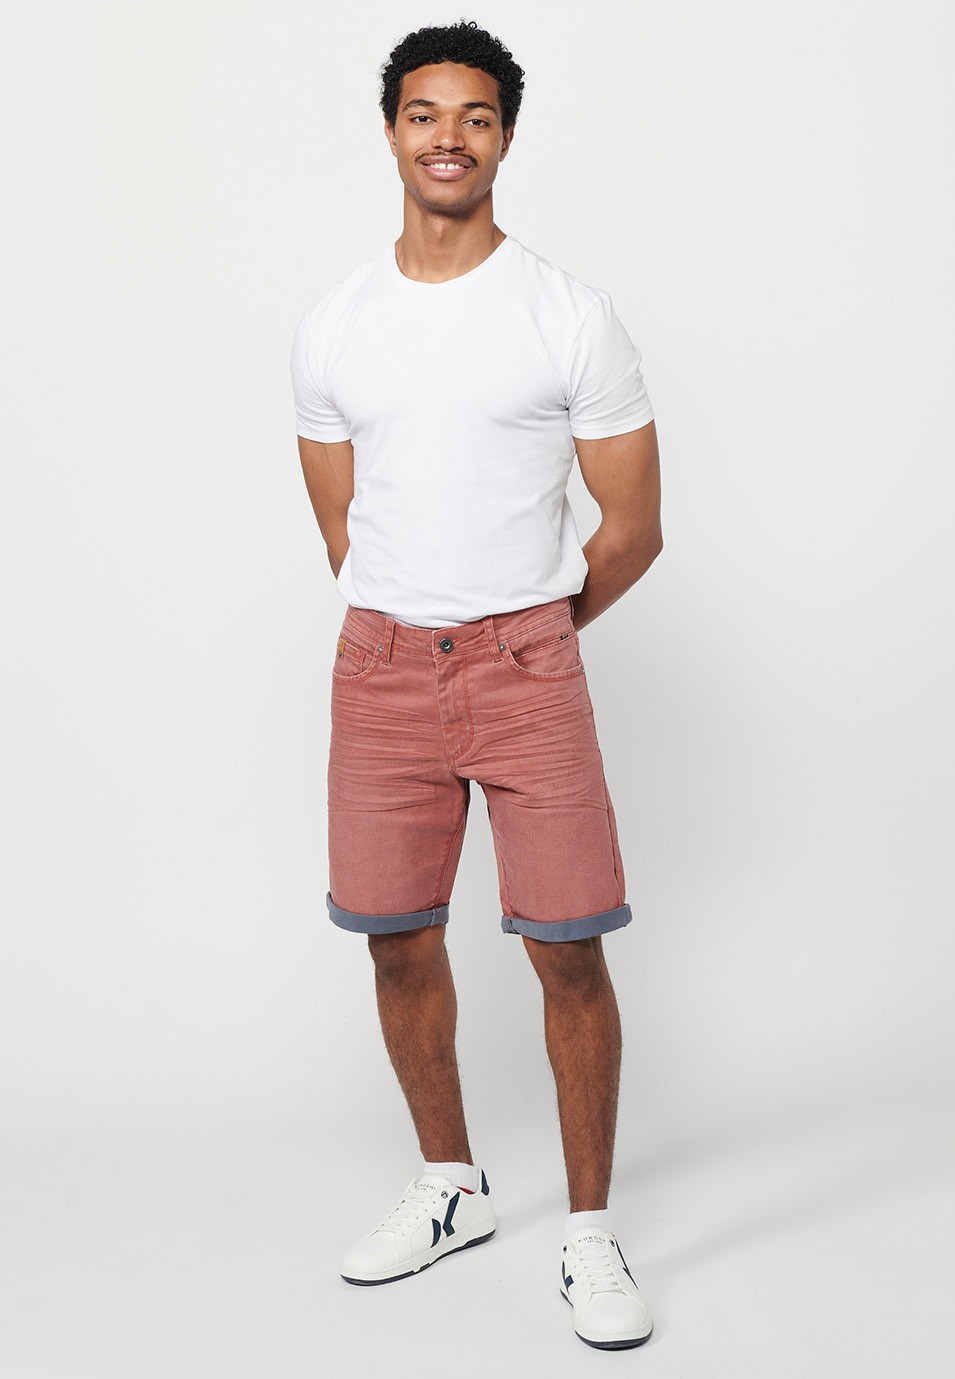 Denim Bermuda shorts with turn-up finish, front closure with zipper and button with five pockets, one pocket in Maroon Color for Men